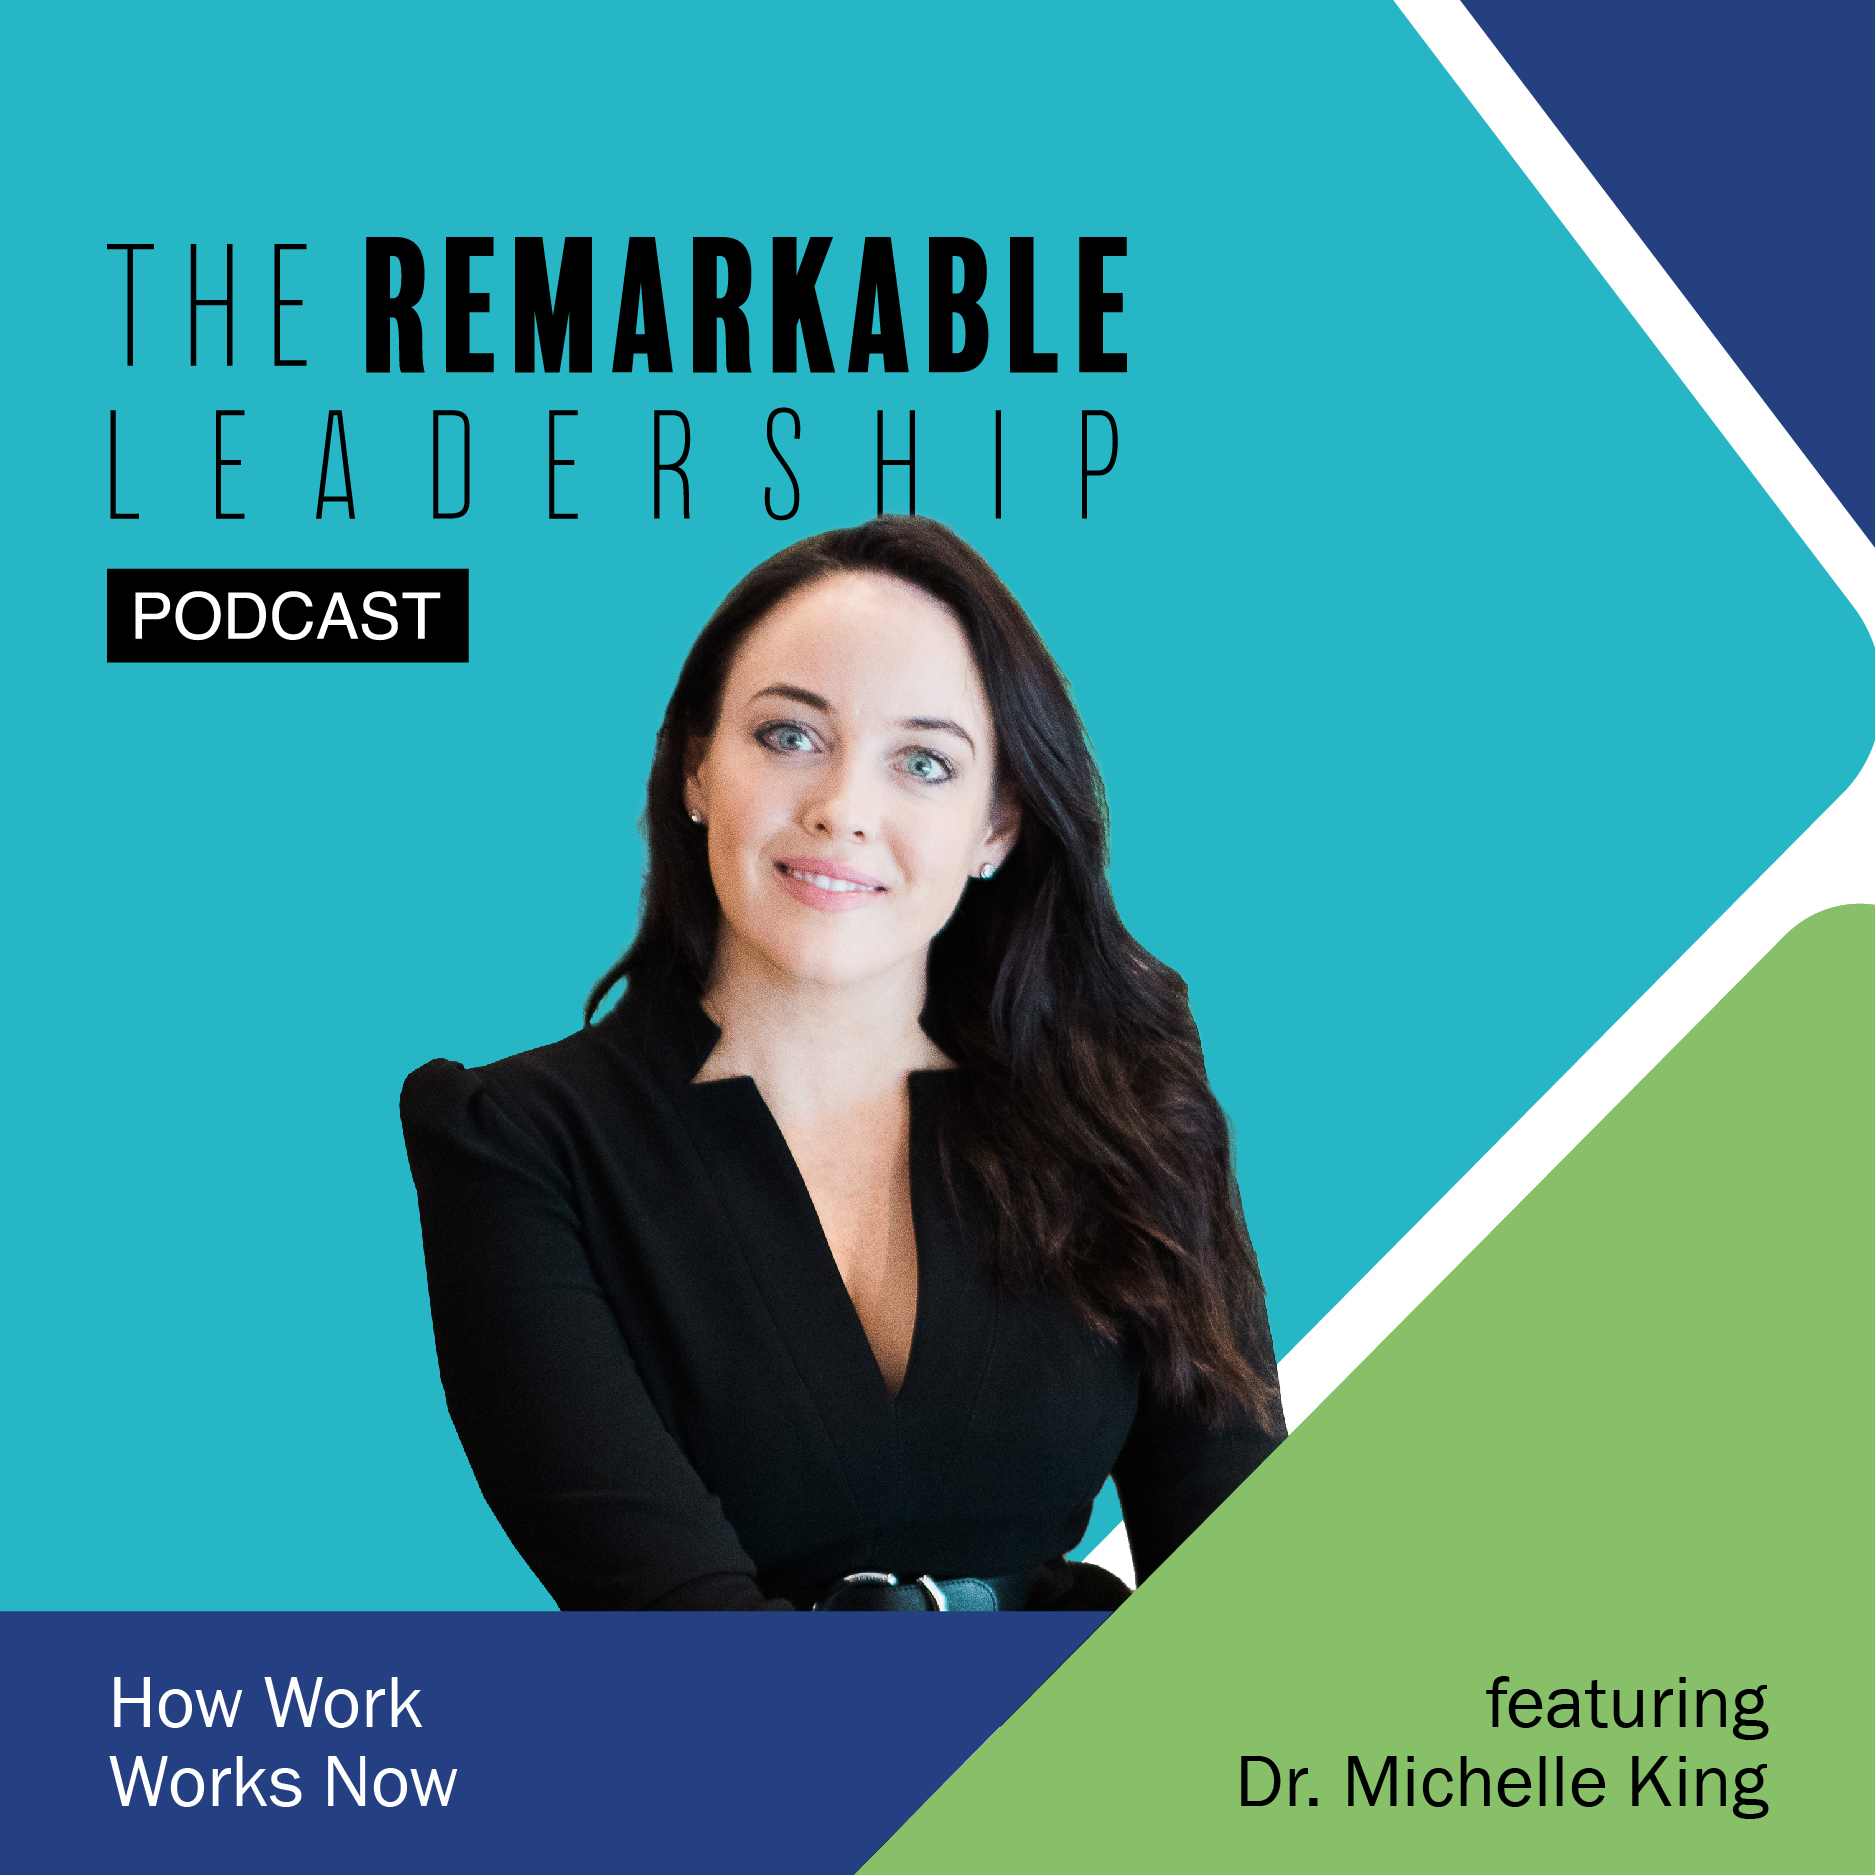 How Work Works Now with Dr. Michelle King